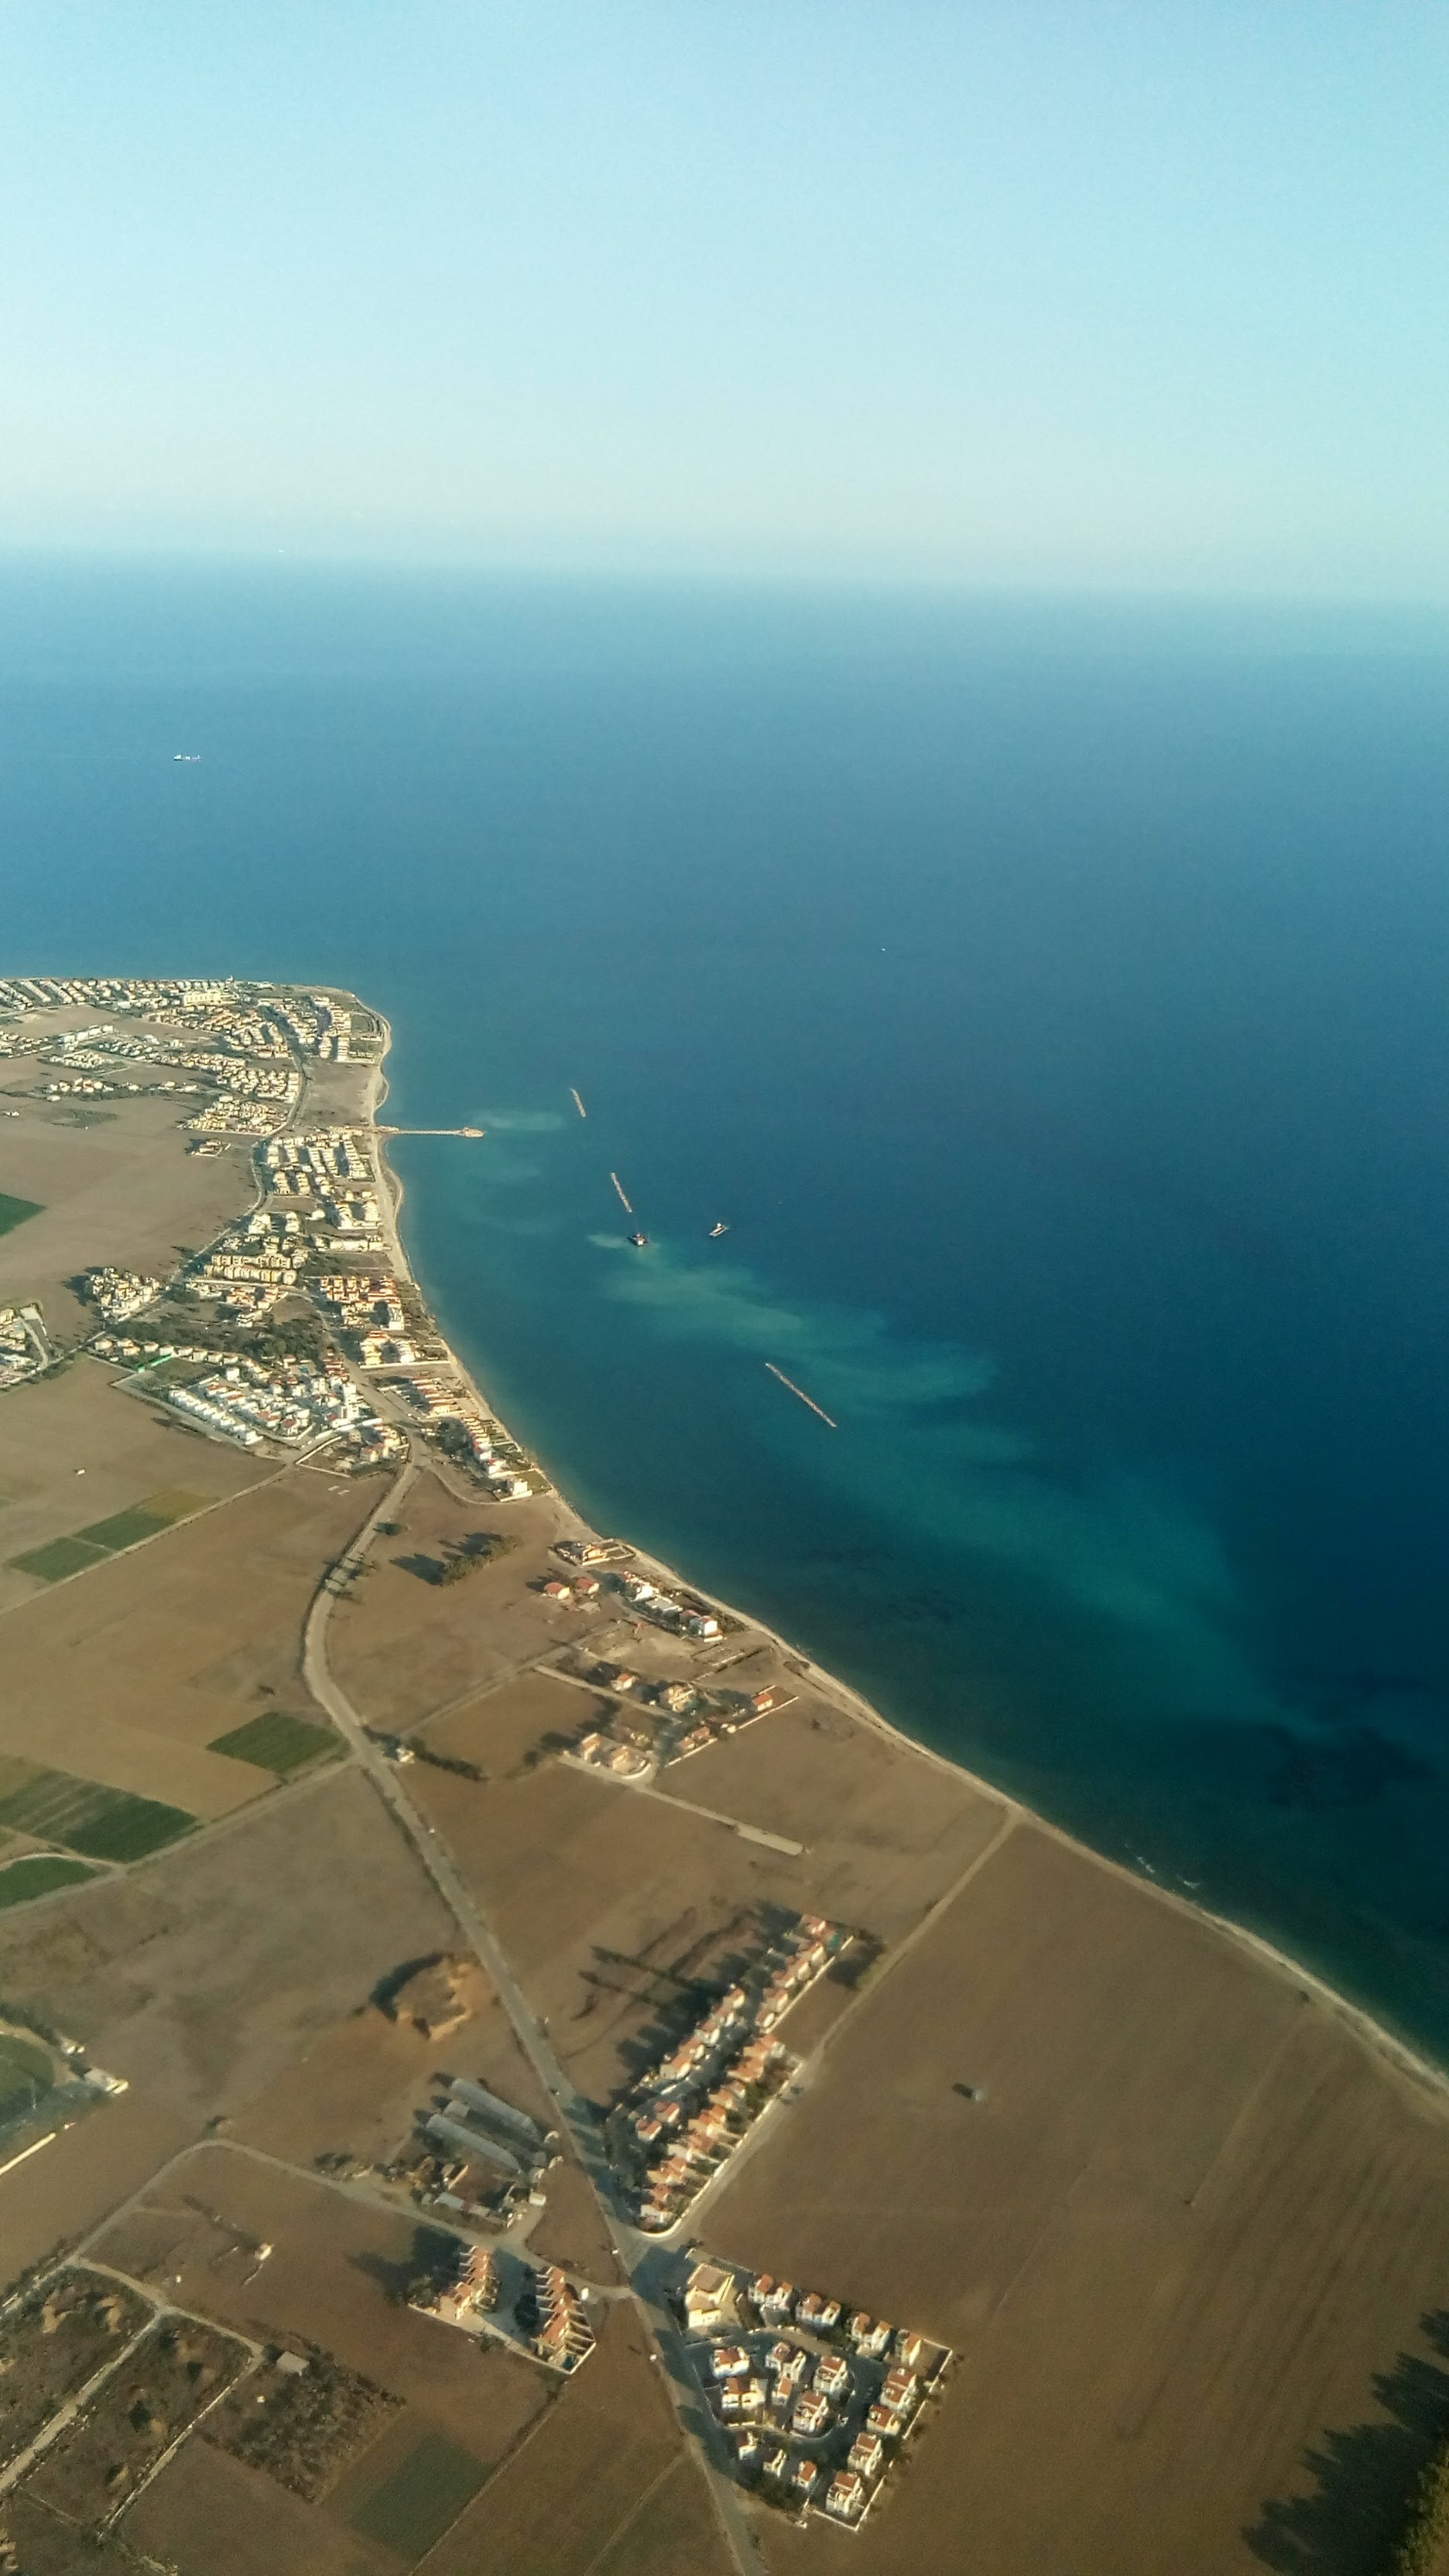 Just after take off from Larnaca Airport, Cyprus